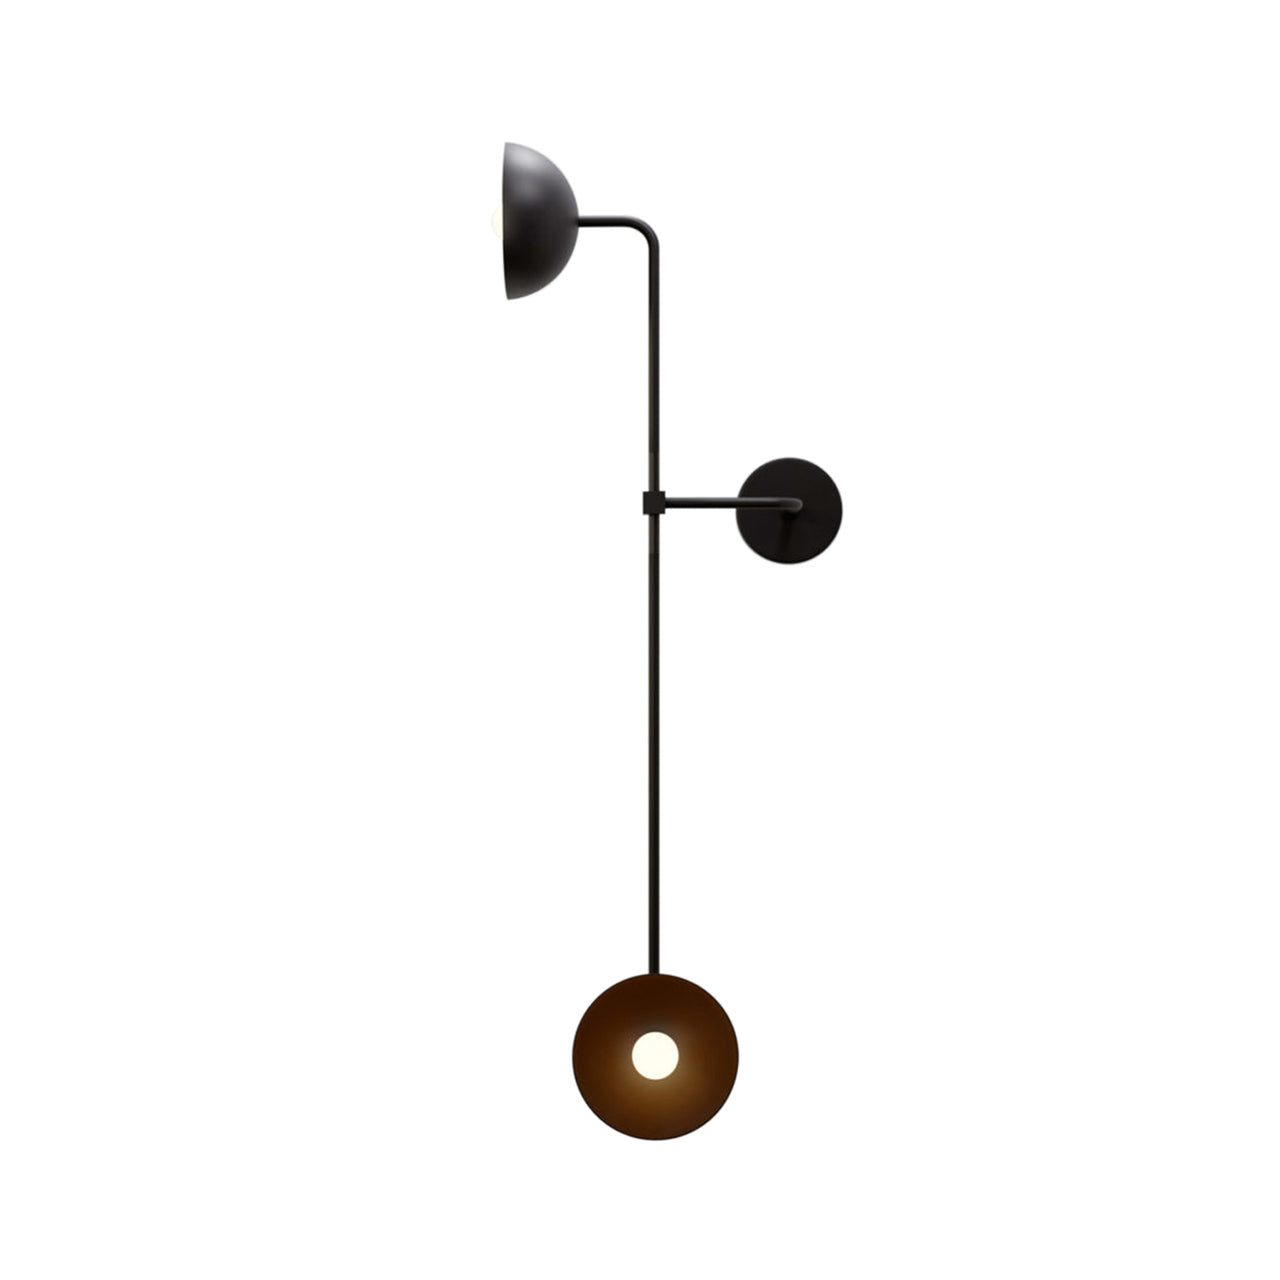 Beaubien Wall Double Shade Lamp: Black + Graphite + Reversed